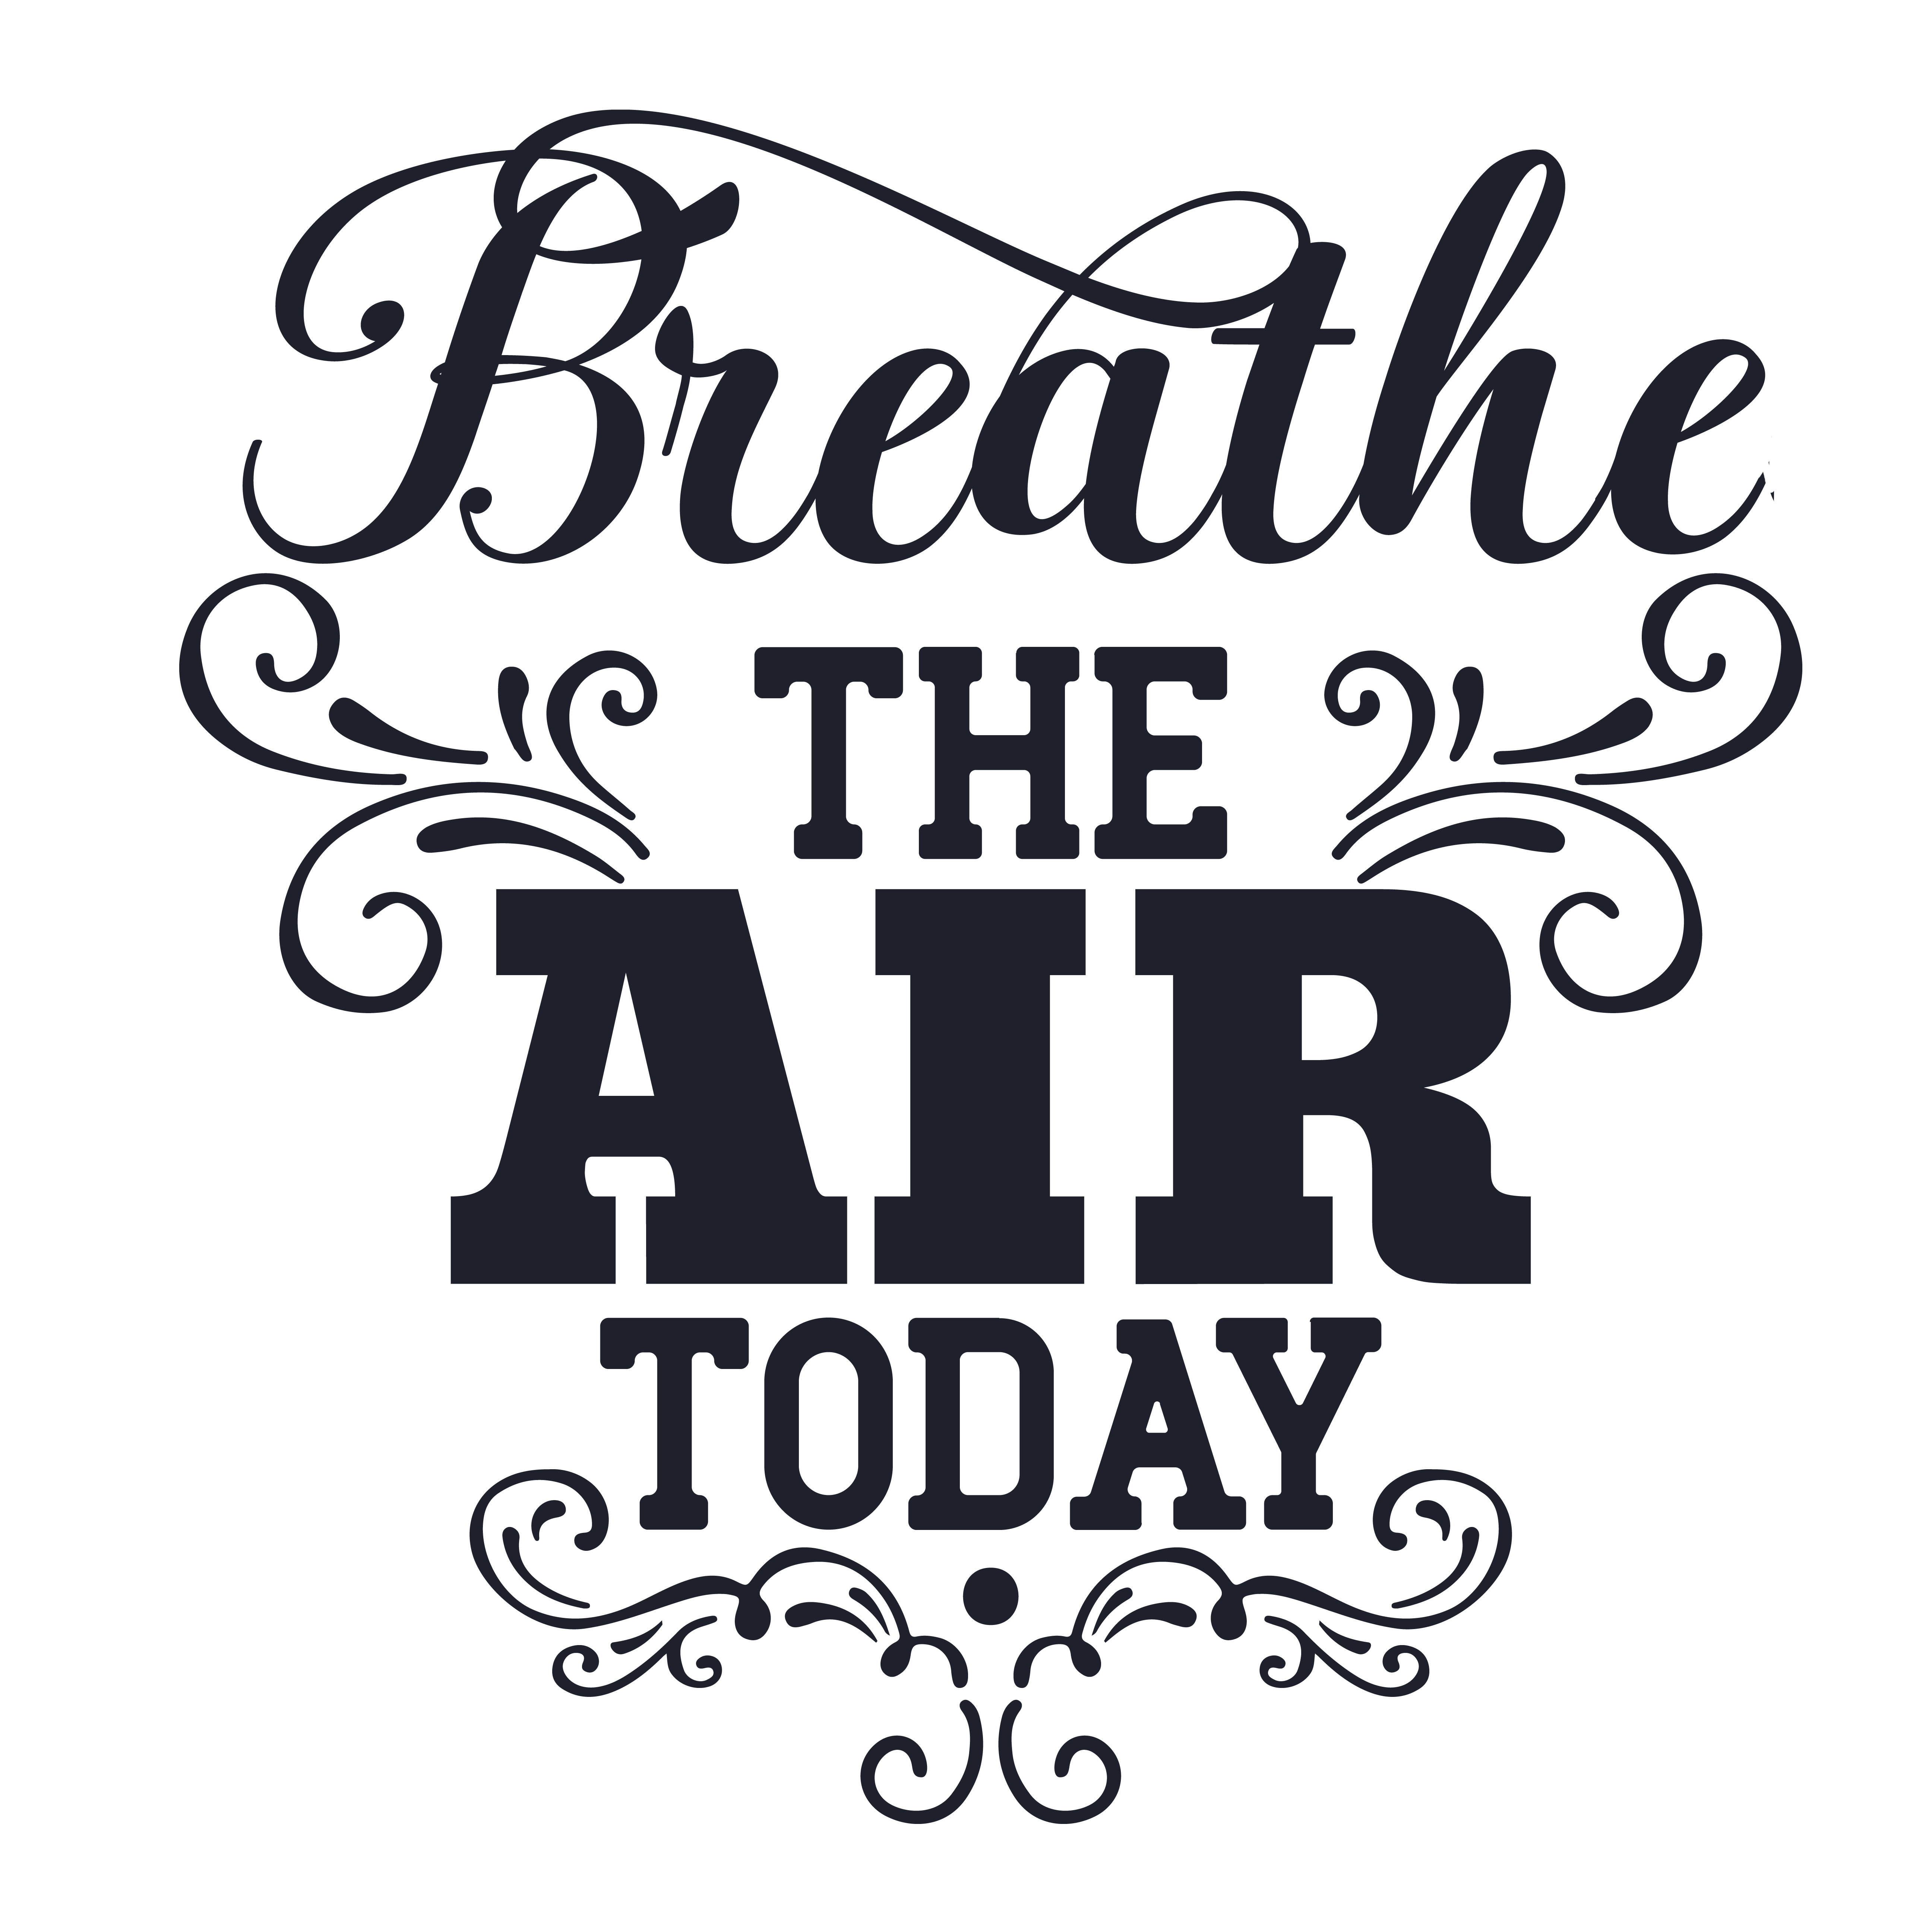 Breathe the air today